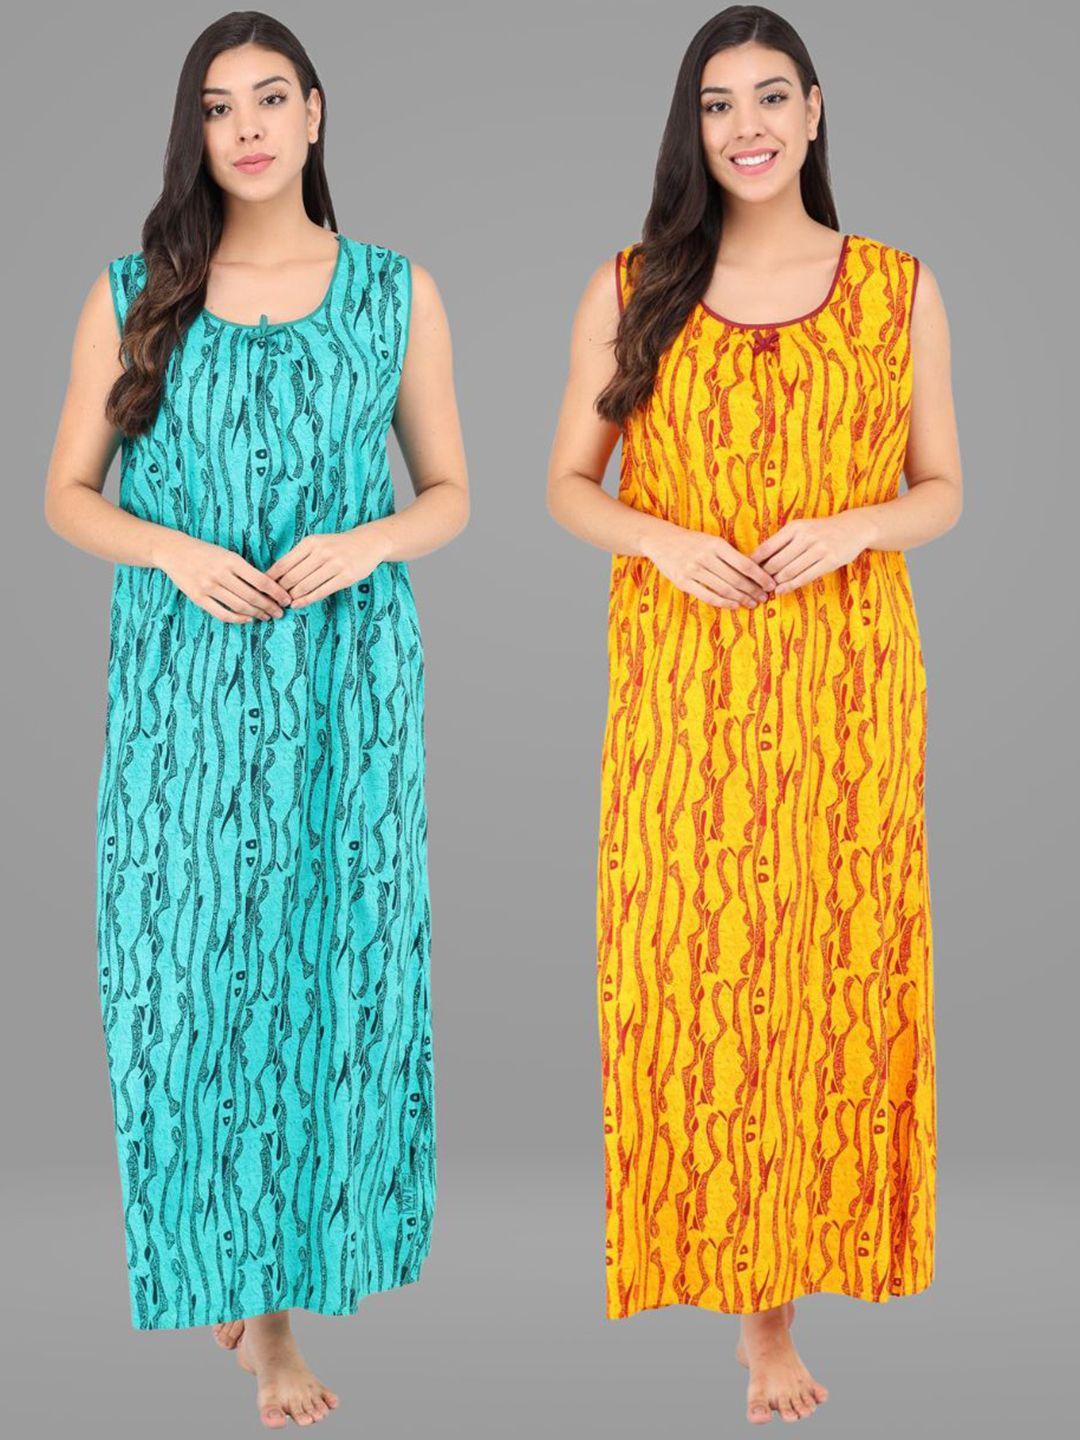 shararat-women-set-of-2-turquoise-blue-&-yellow-abstract-printed-maxi-nightdresses